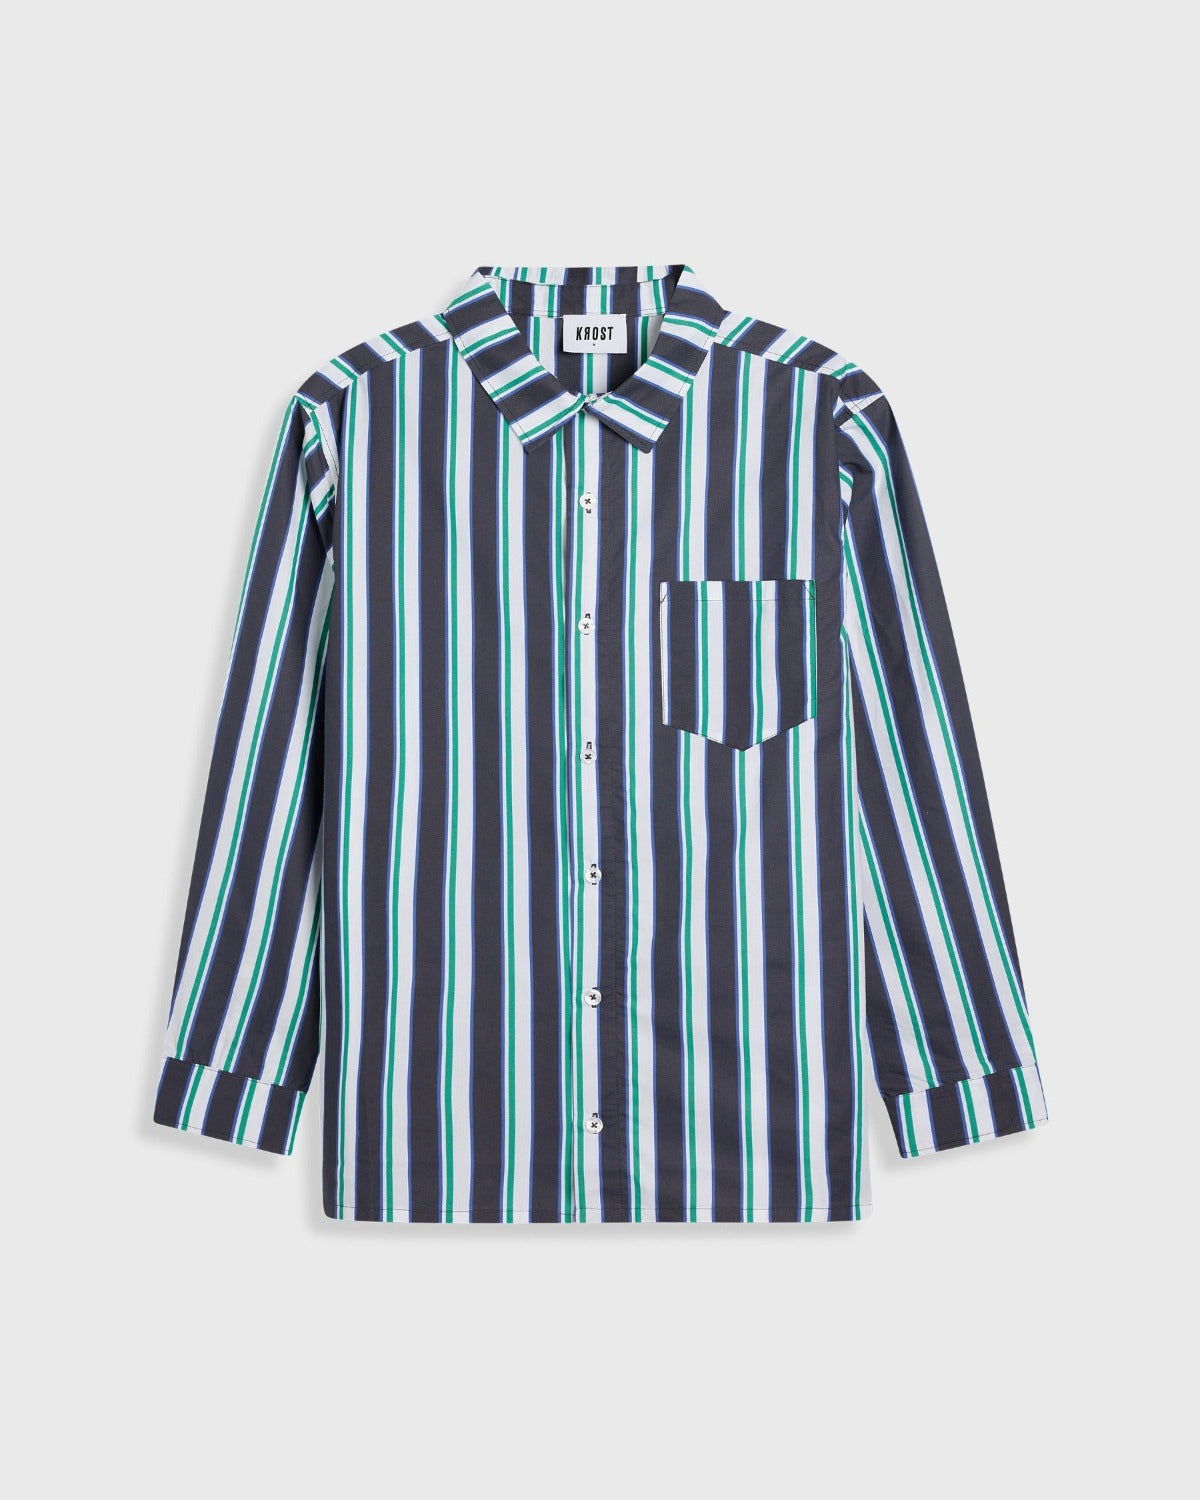 Photo of KROST x Nautica | Striped Button Up, number 2